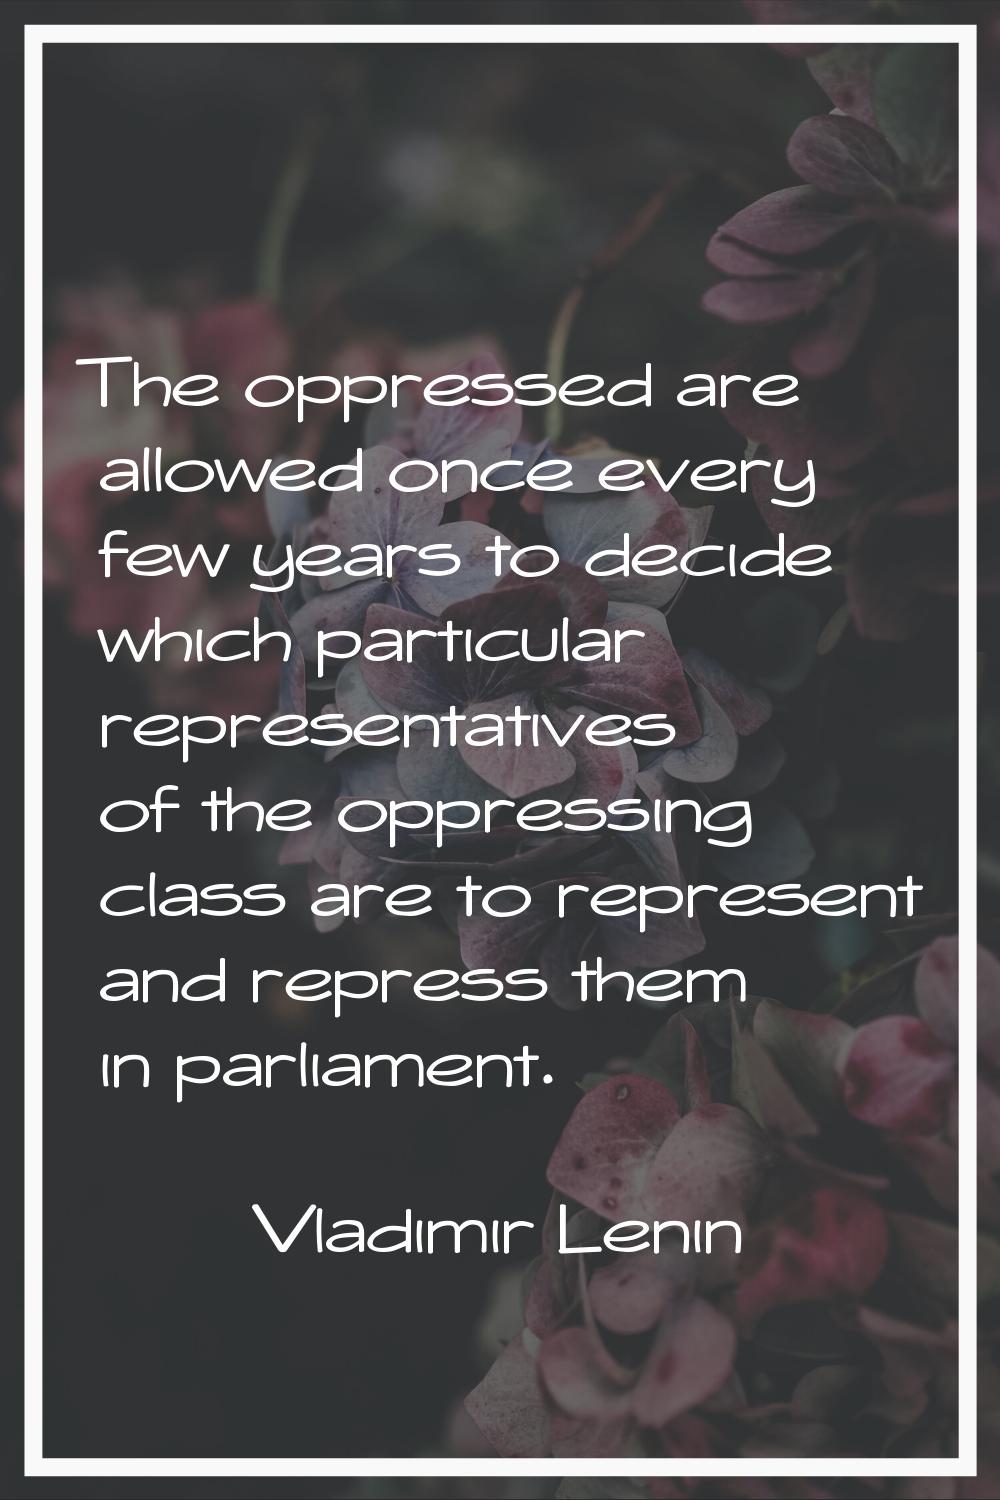 The oppressed are allowed once every few years to decide which particular representatives of the op